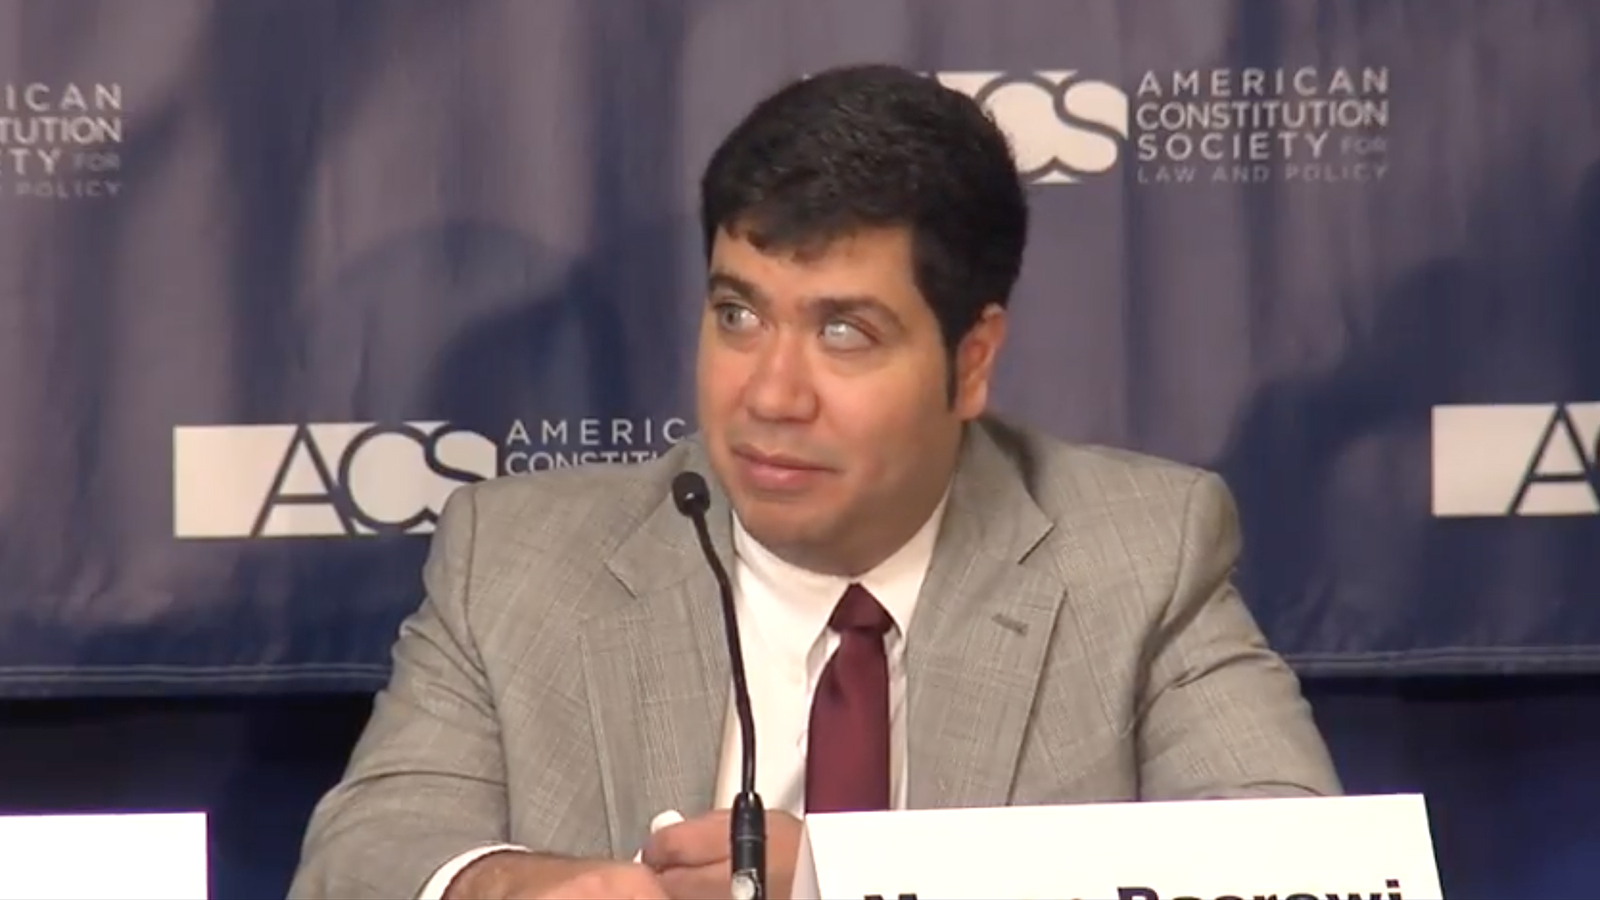 Mazen Basrawi participates in a panel hosted by the American Constitution Society in 2017. Video screen grab